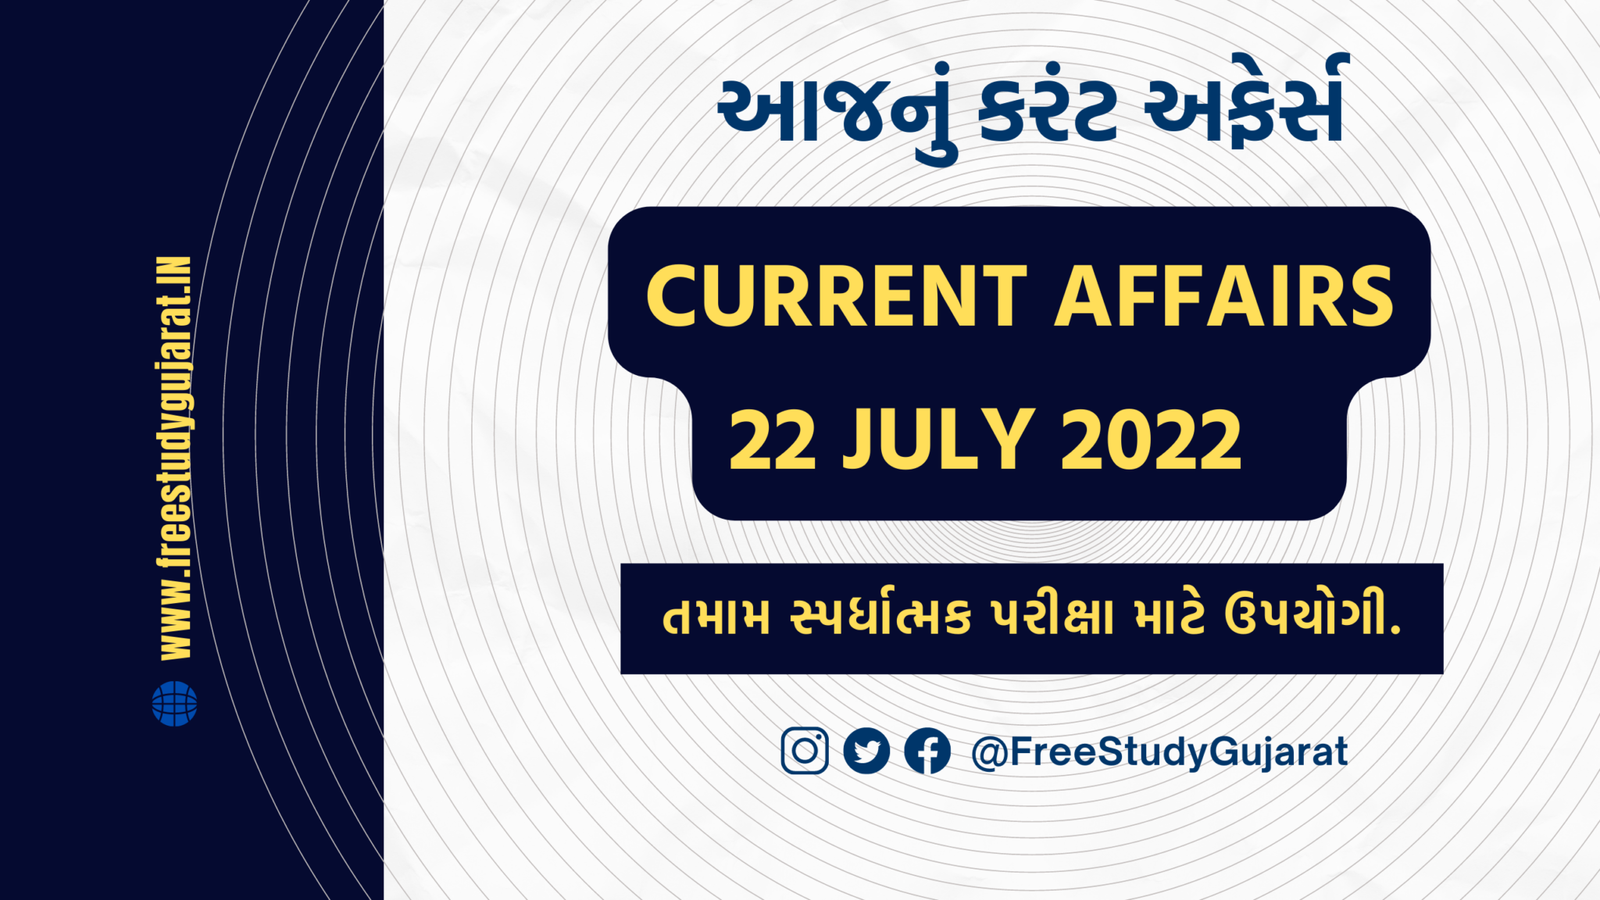 22 JULY 2022 CURRENT AFFAIRS IN GUJARAT